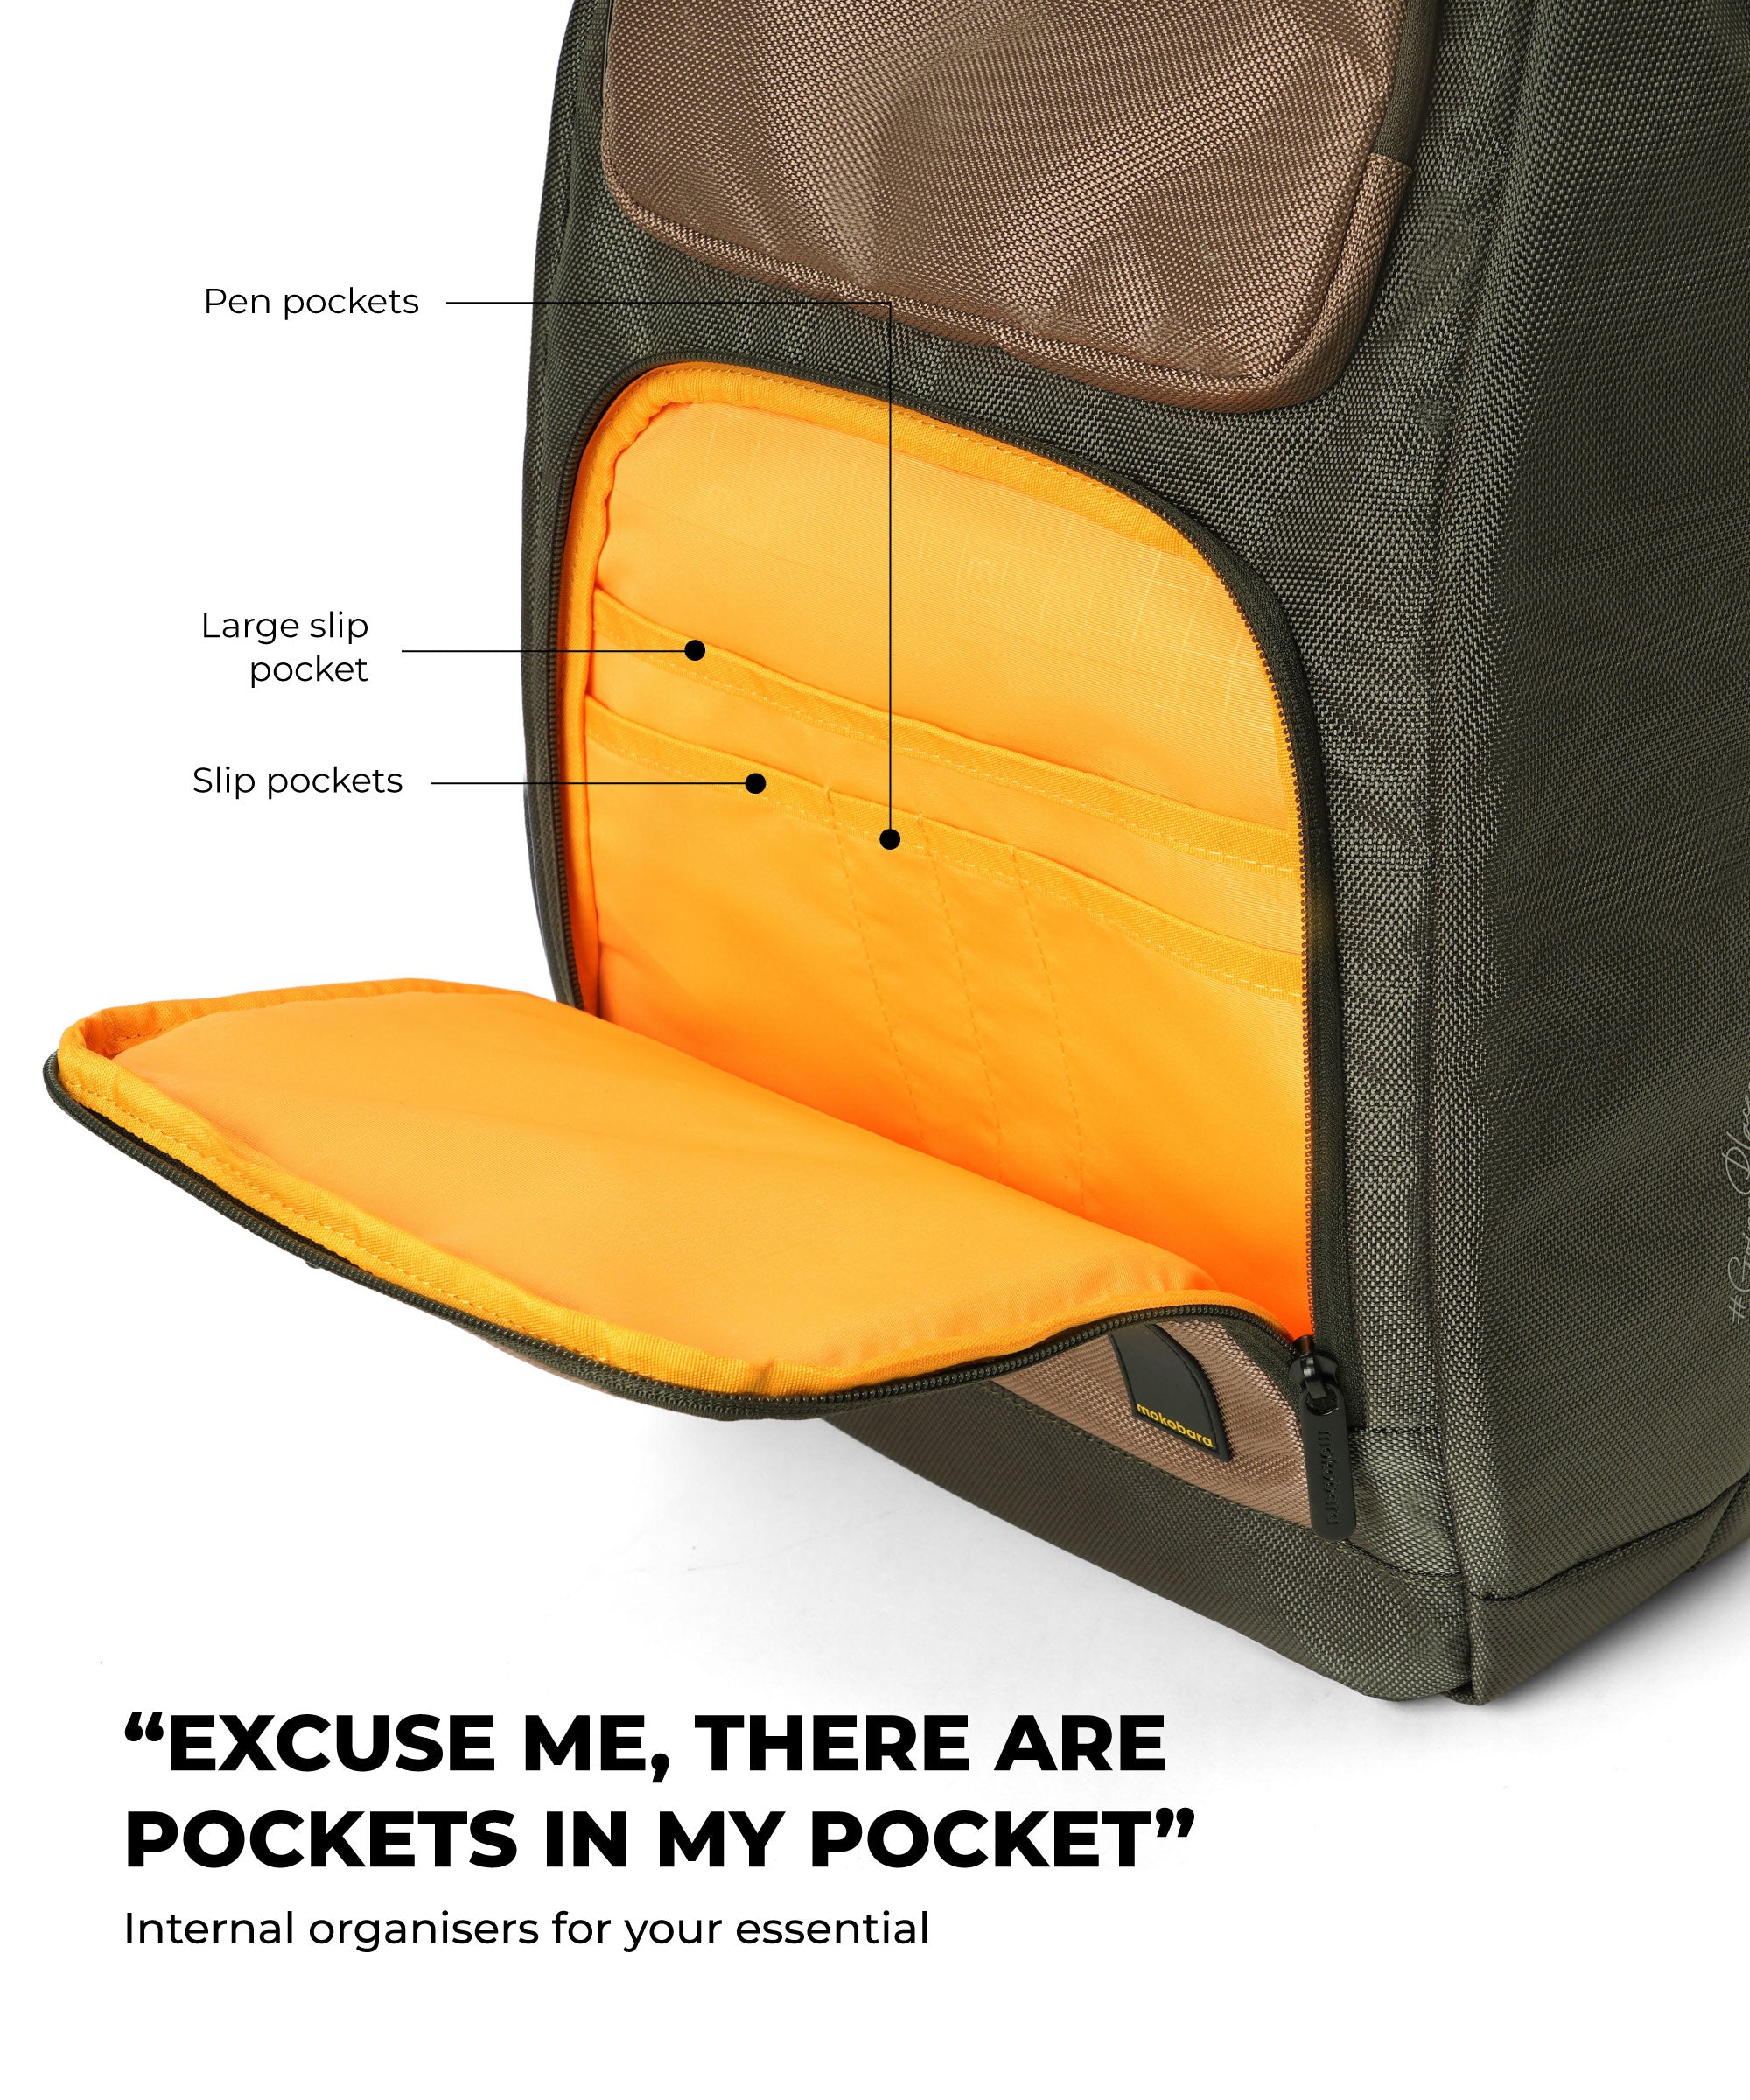 Color_Camouflage | The Cosmos Backpack